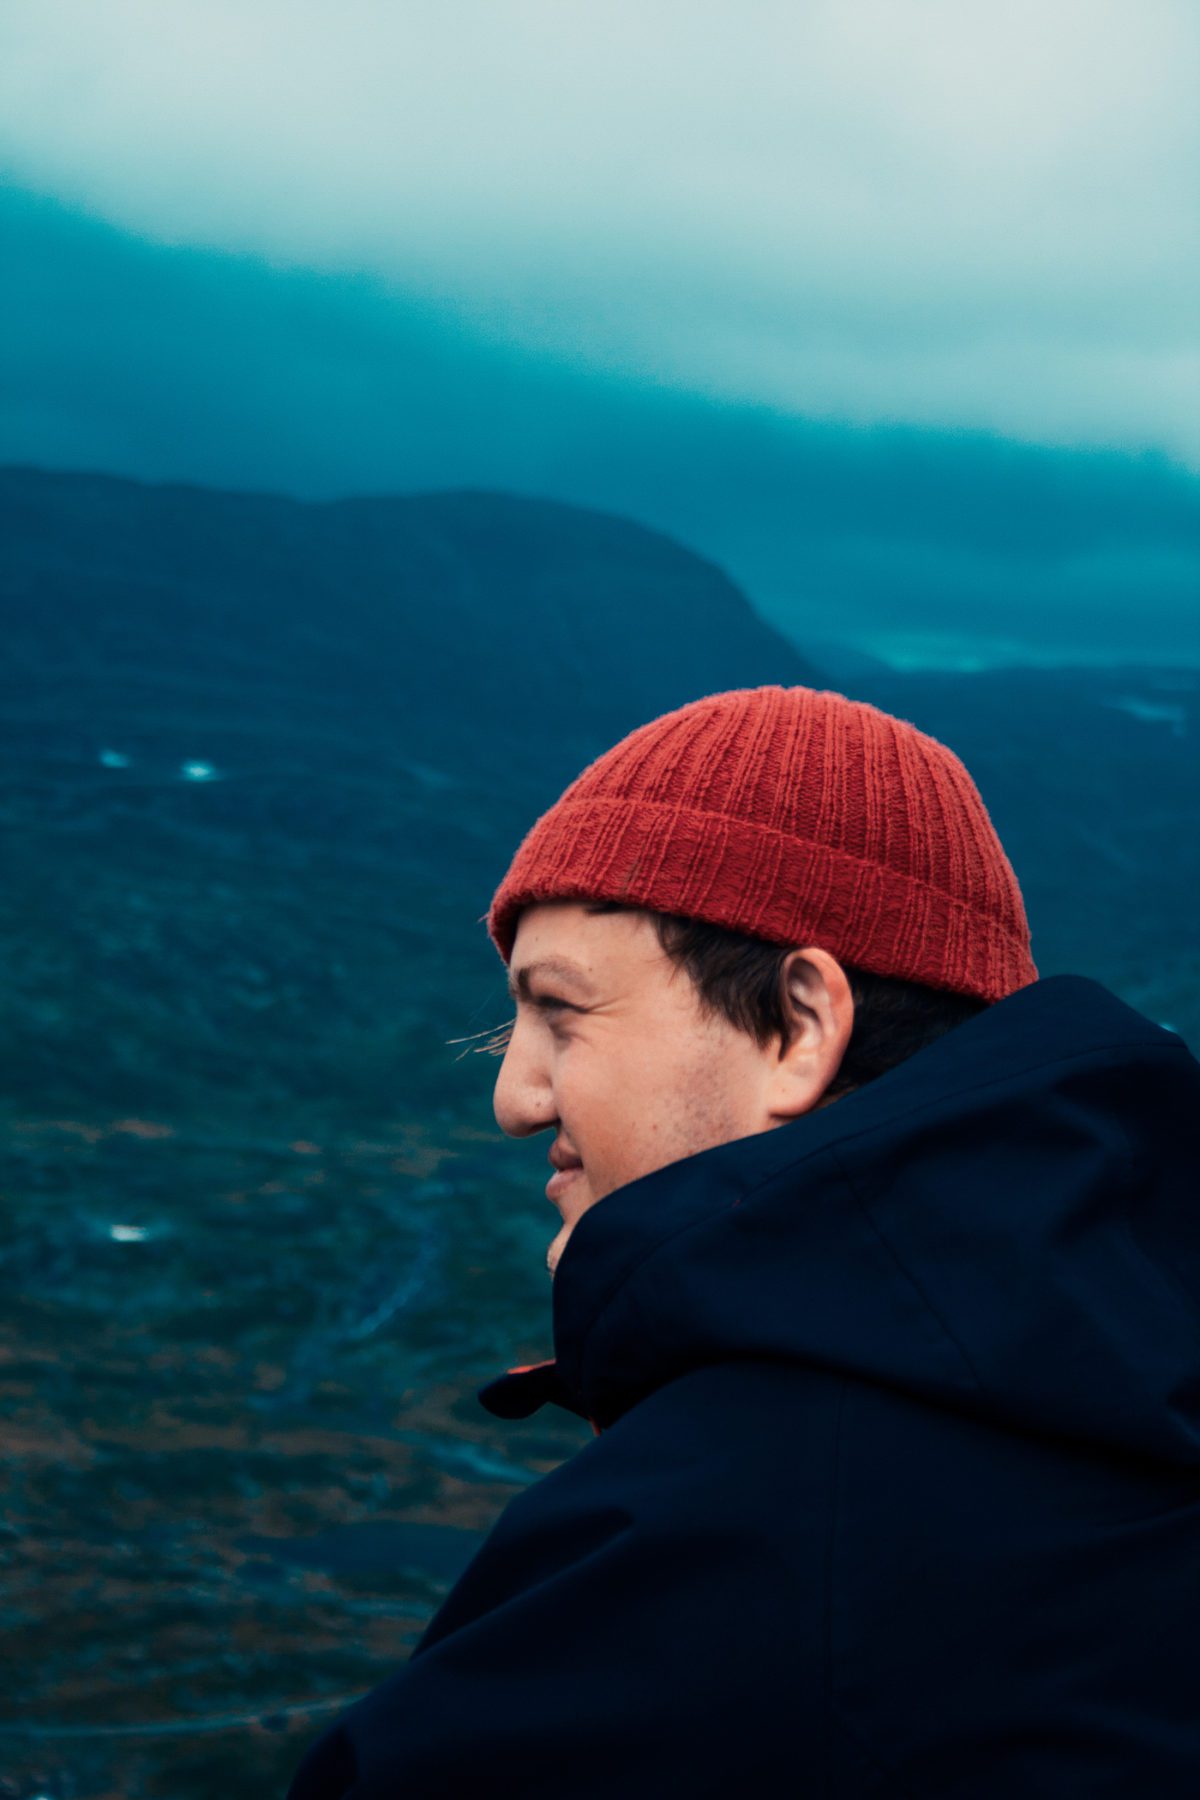 Cloudy summer mountains in Norway, man wearing beanie.